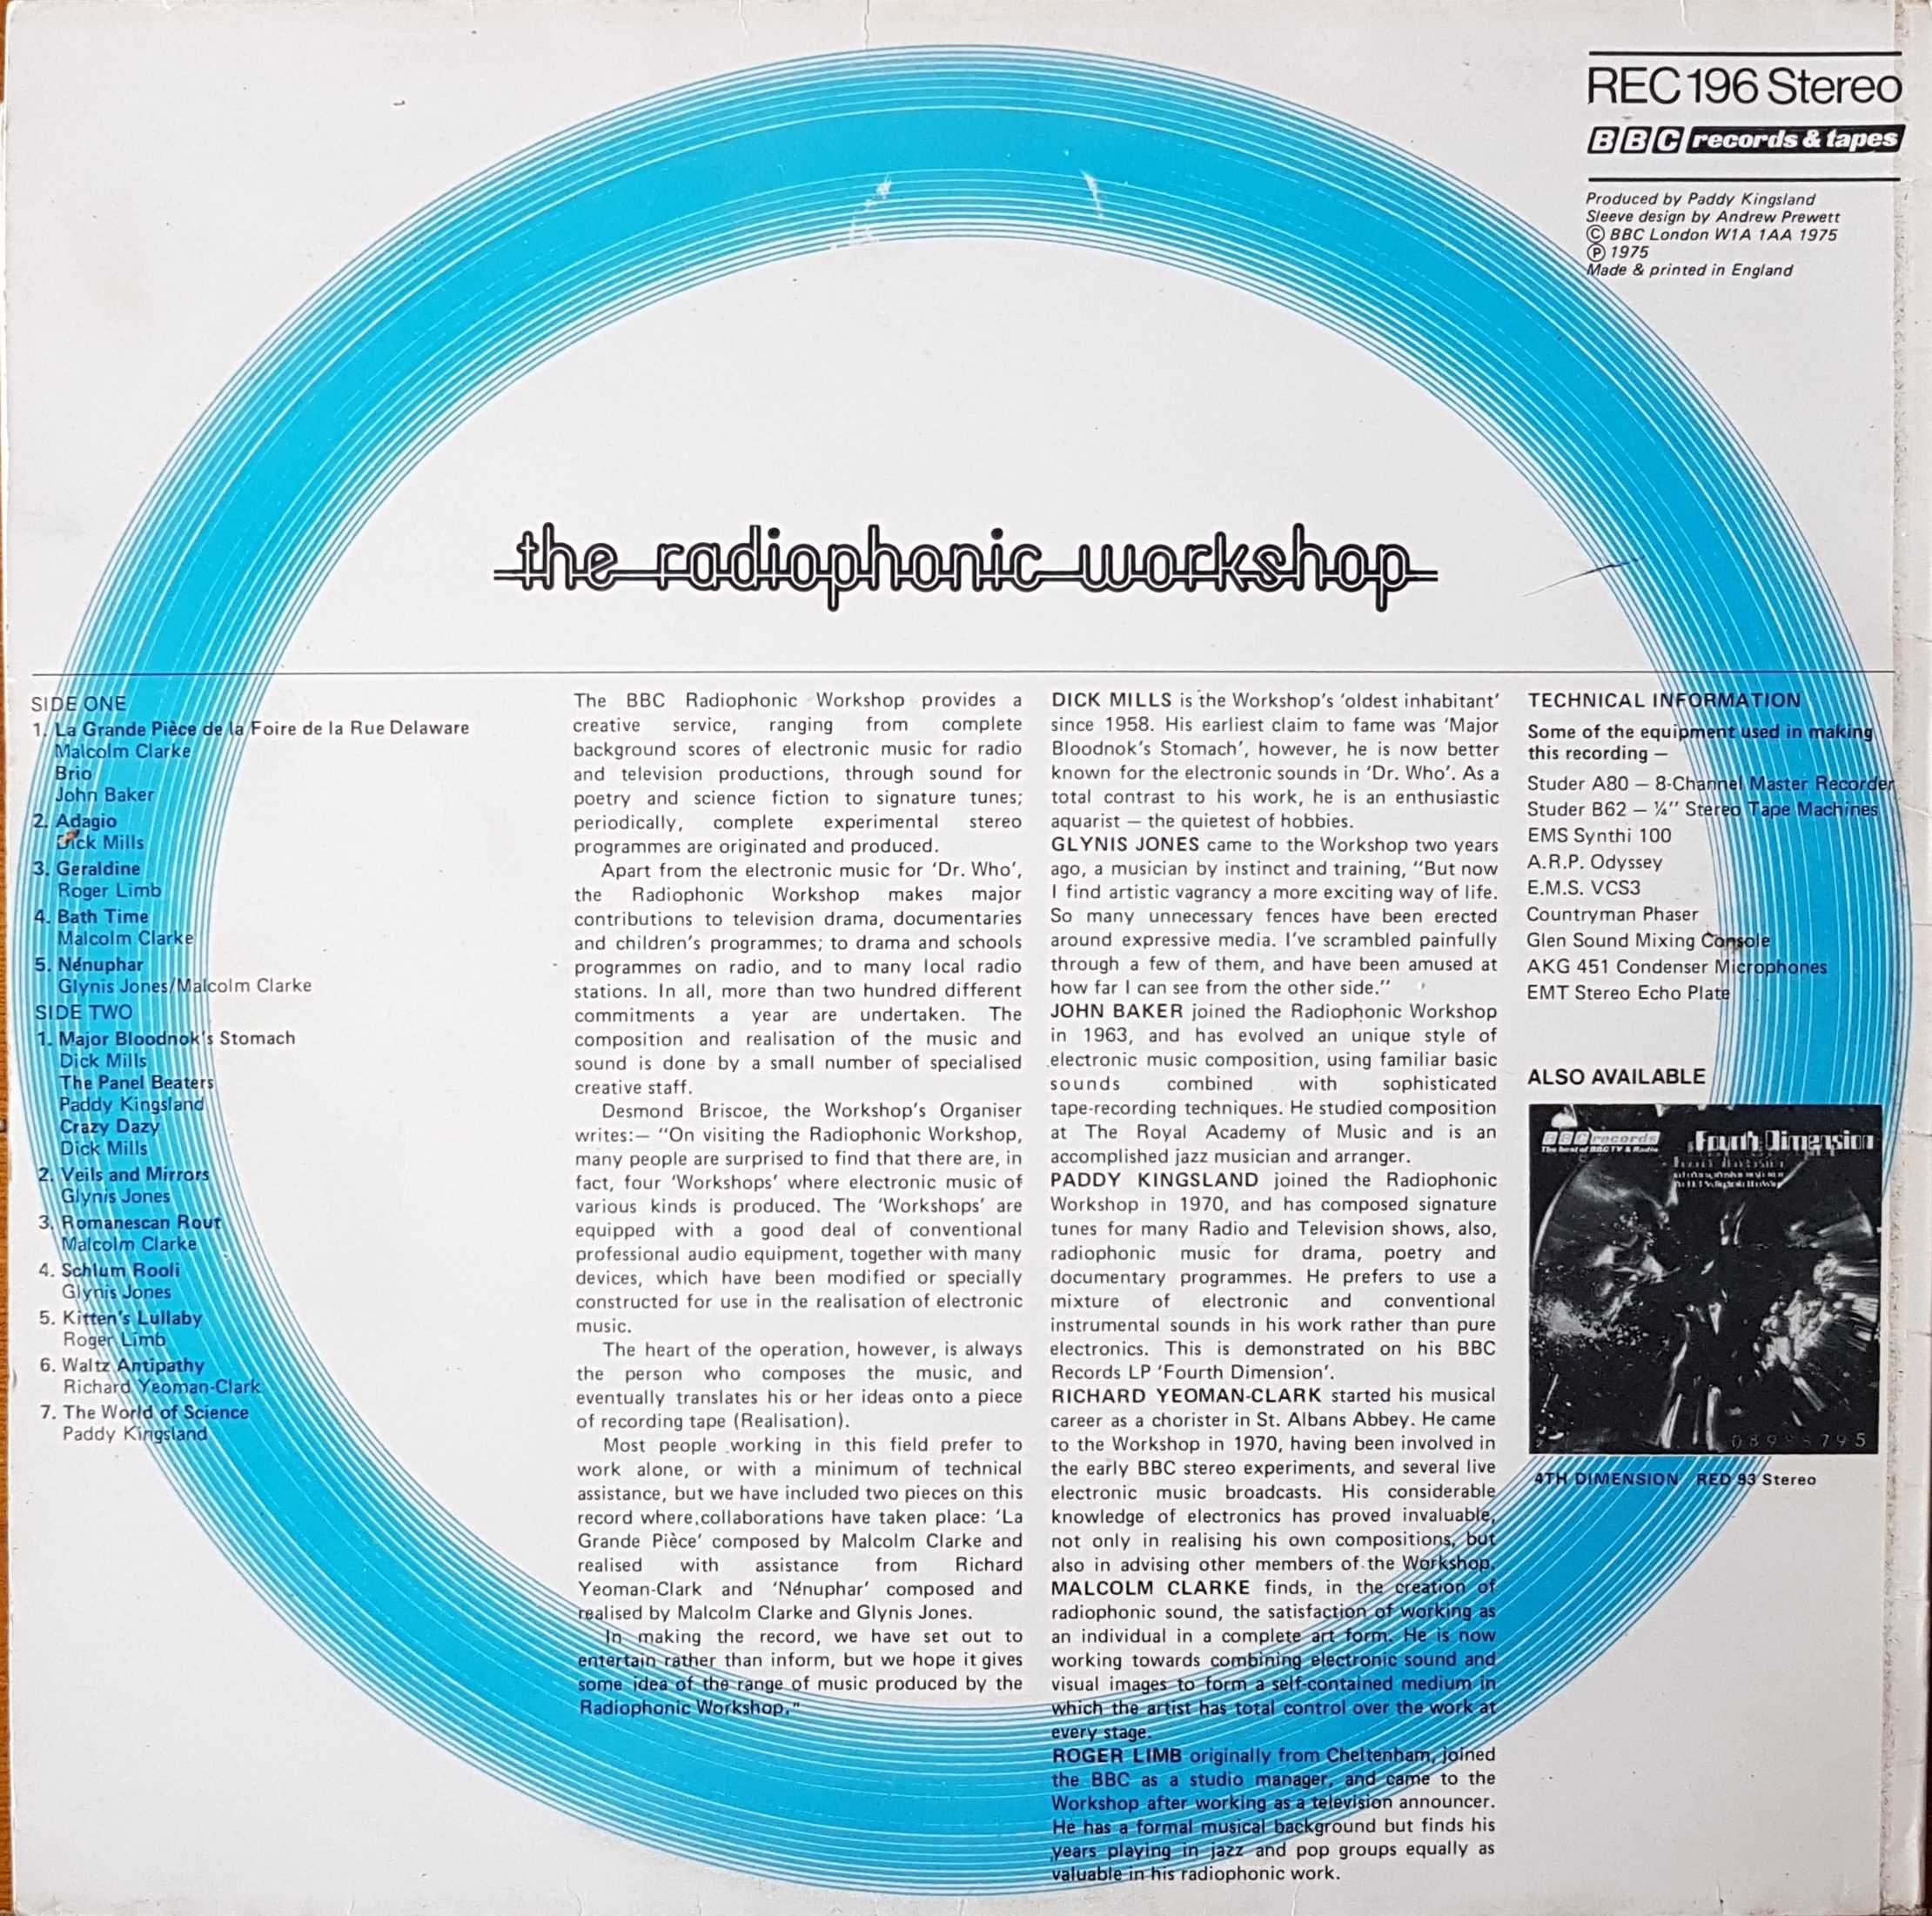 Picture of REC 196 The radiophonic workshop by artist Various from the BBC records and Tapes library